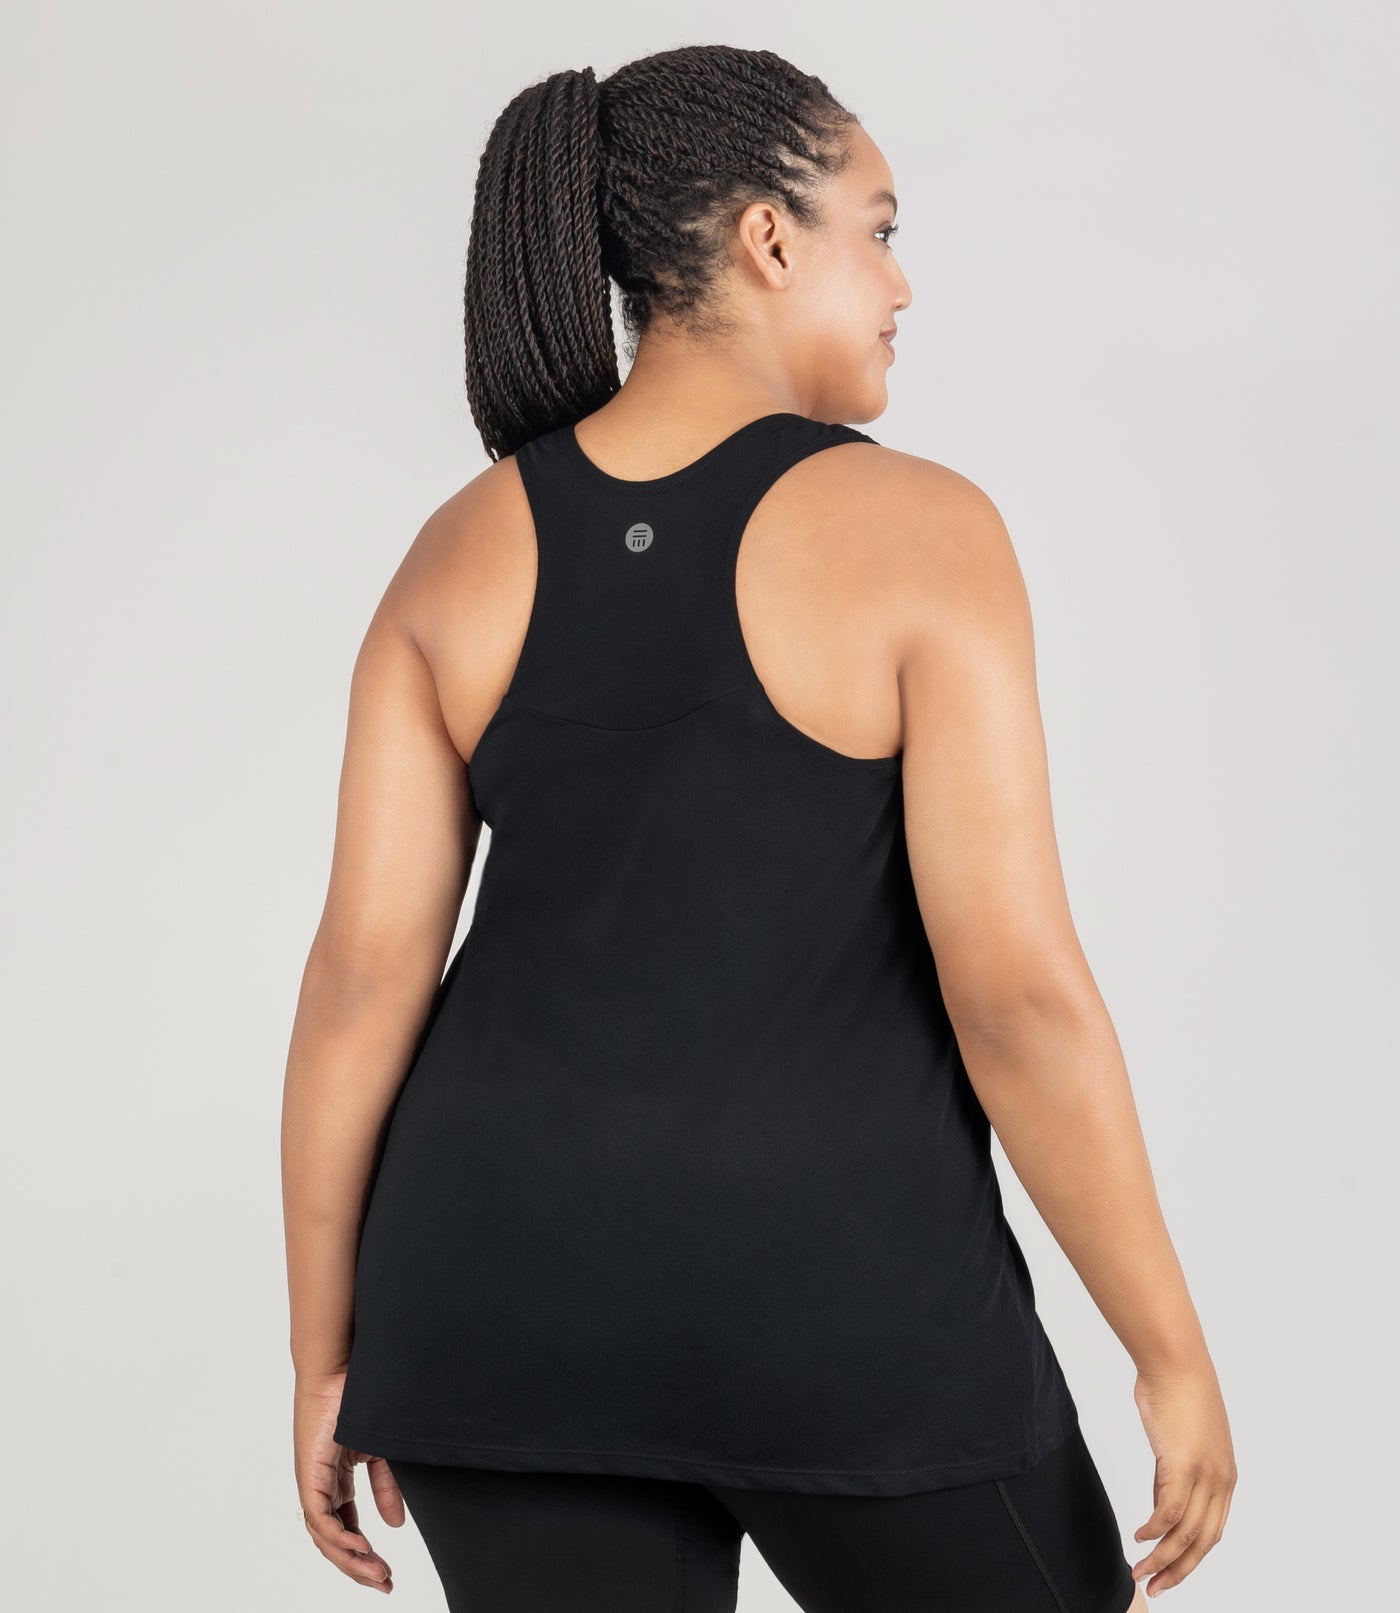 JunoActive model, facing back, is wearing an Aquasport Hanalei Tankin top in color black. Her arms are by her side.